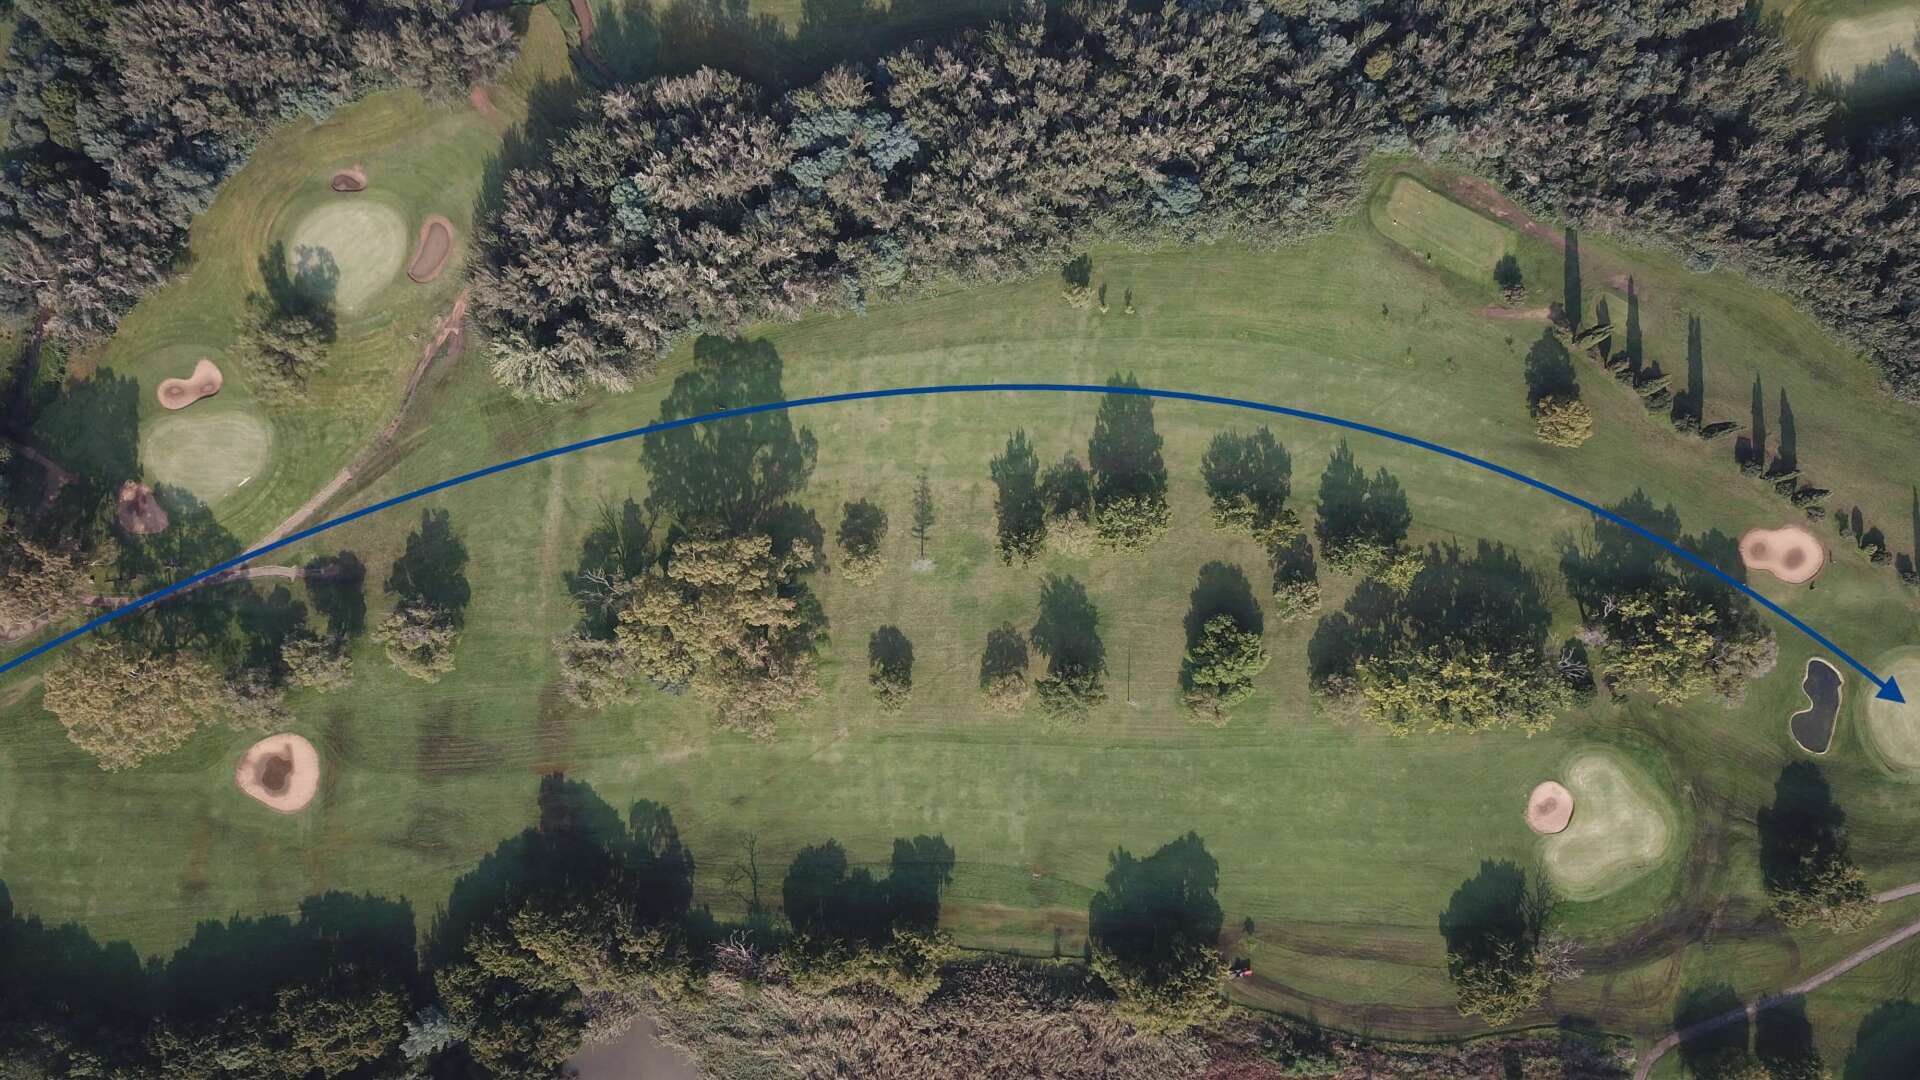 Hole 8 of the course